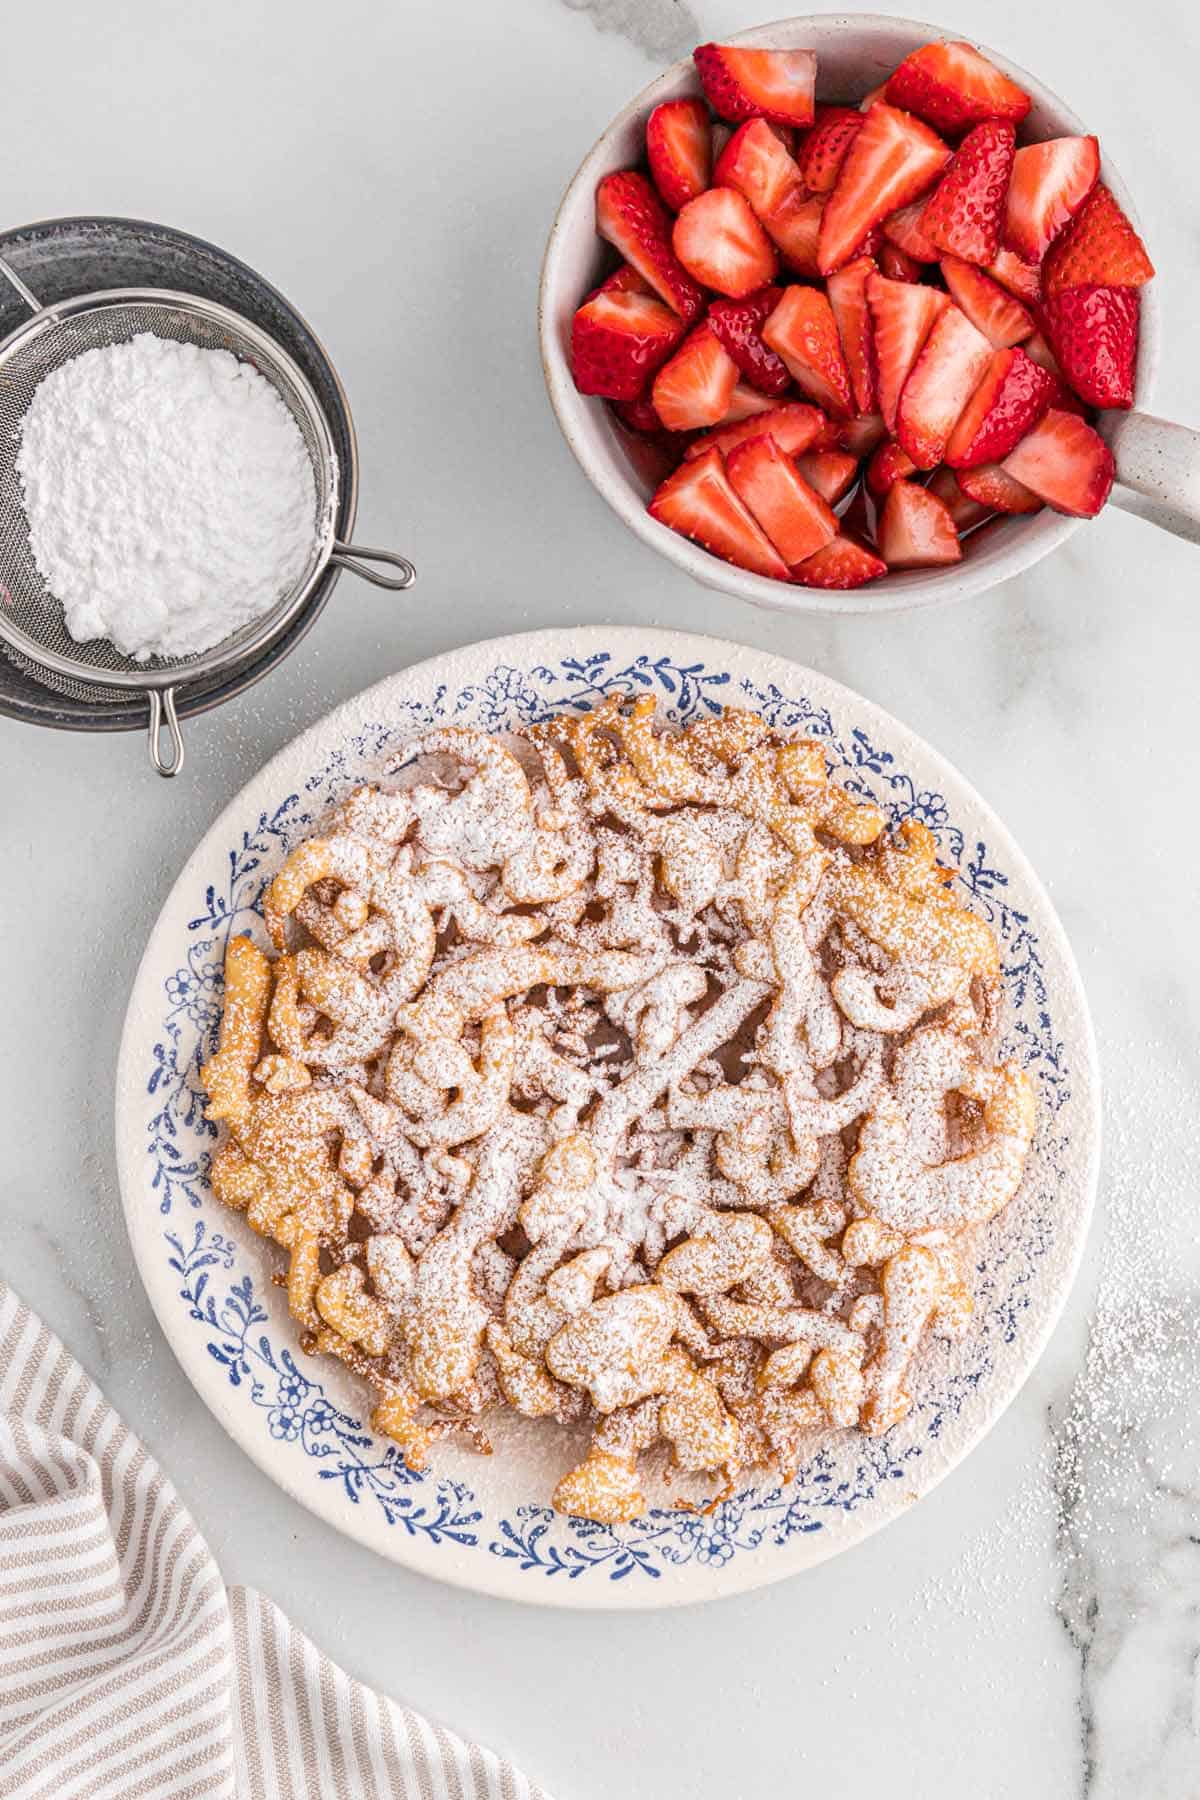 A funnel cake topped with powdered sugar on a plate.